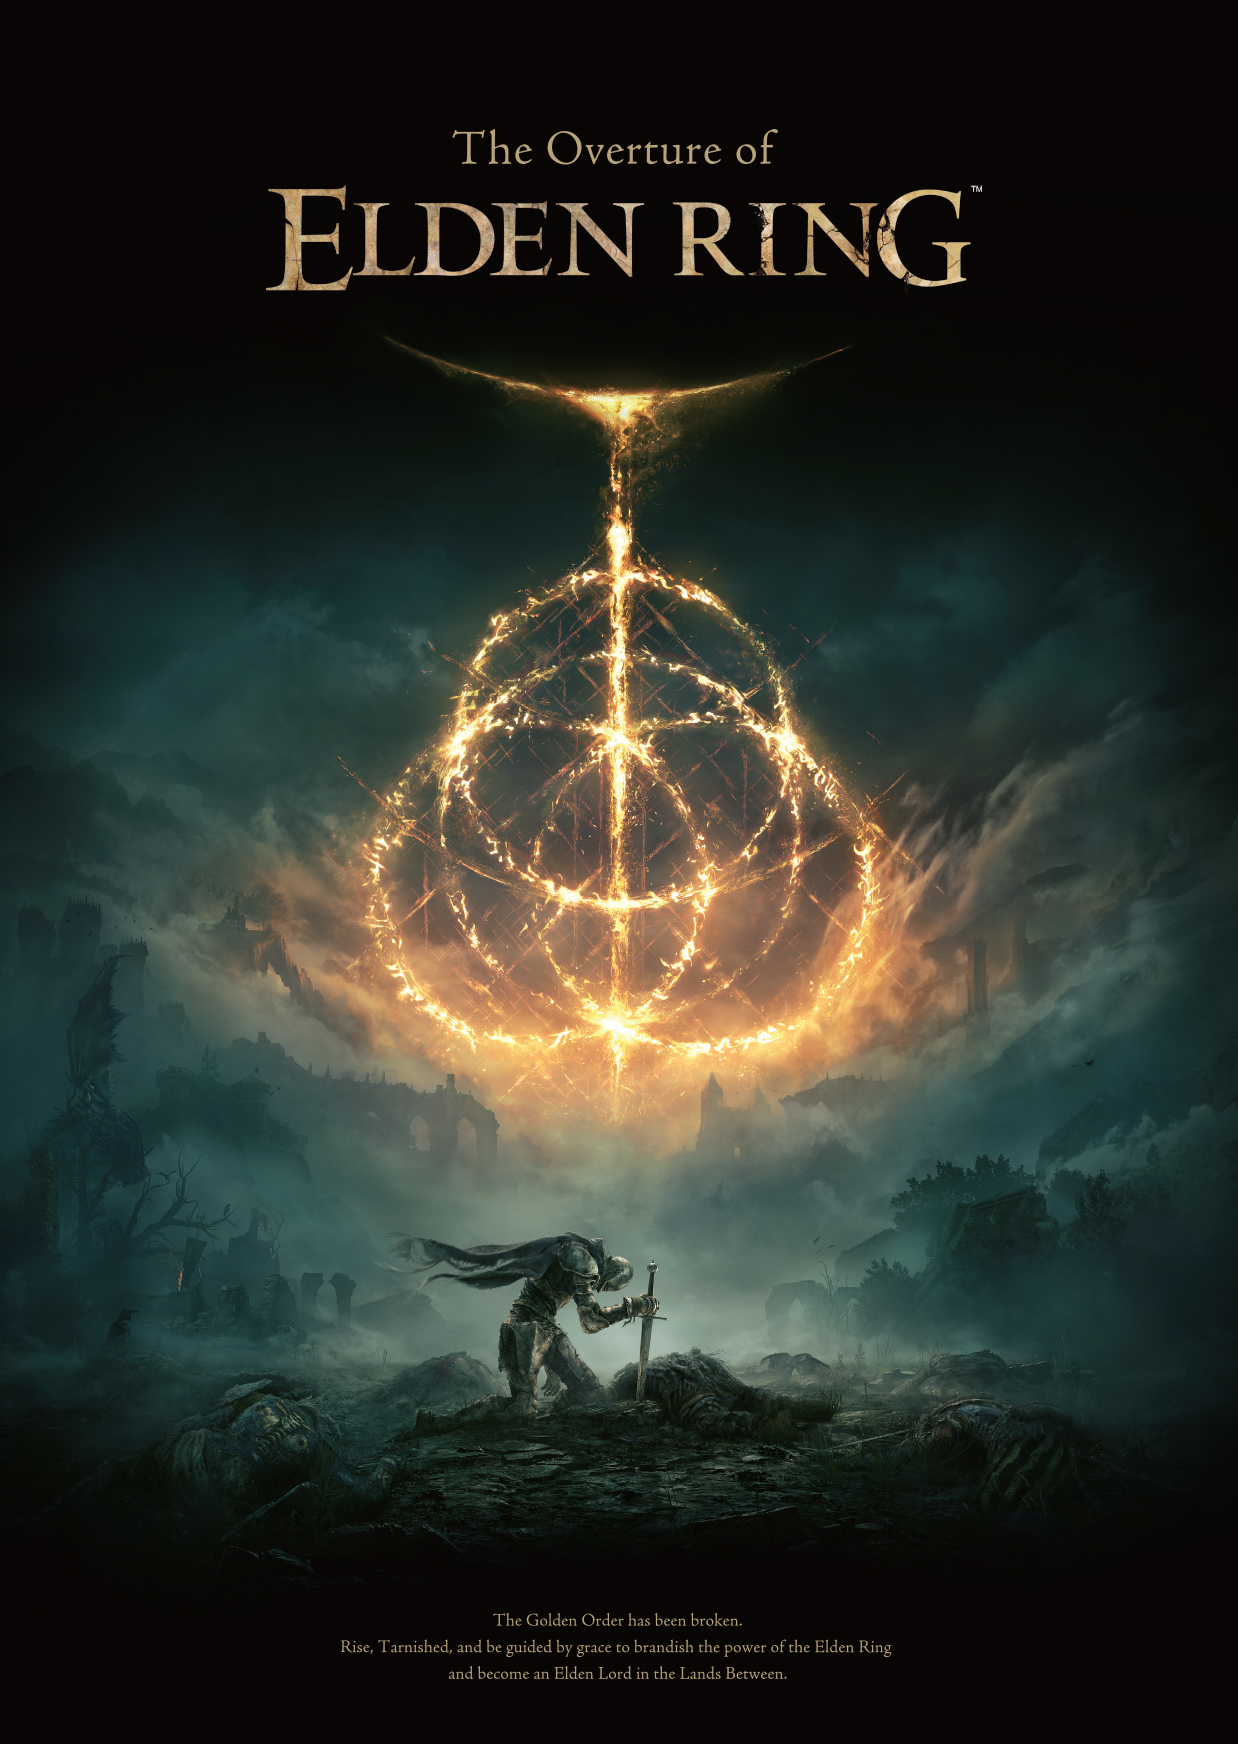 The Overture of ELDEN RING Book Will Debut in February